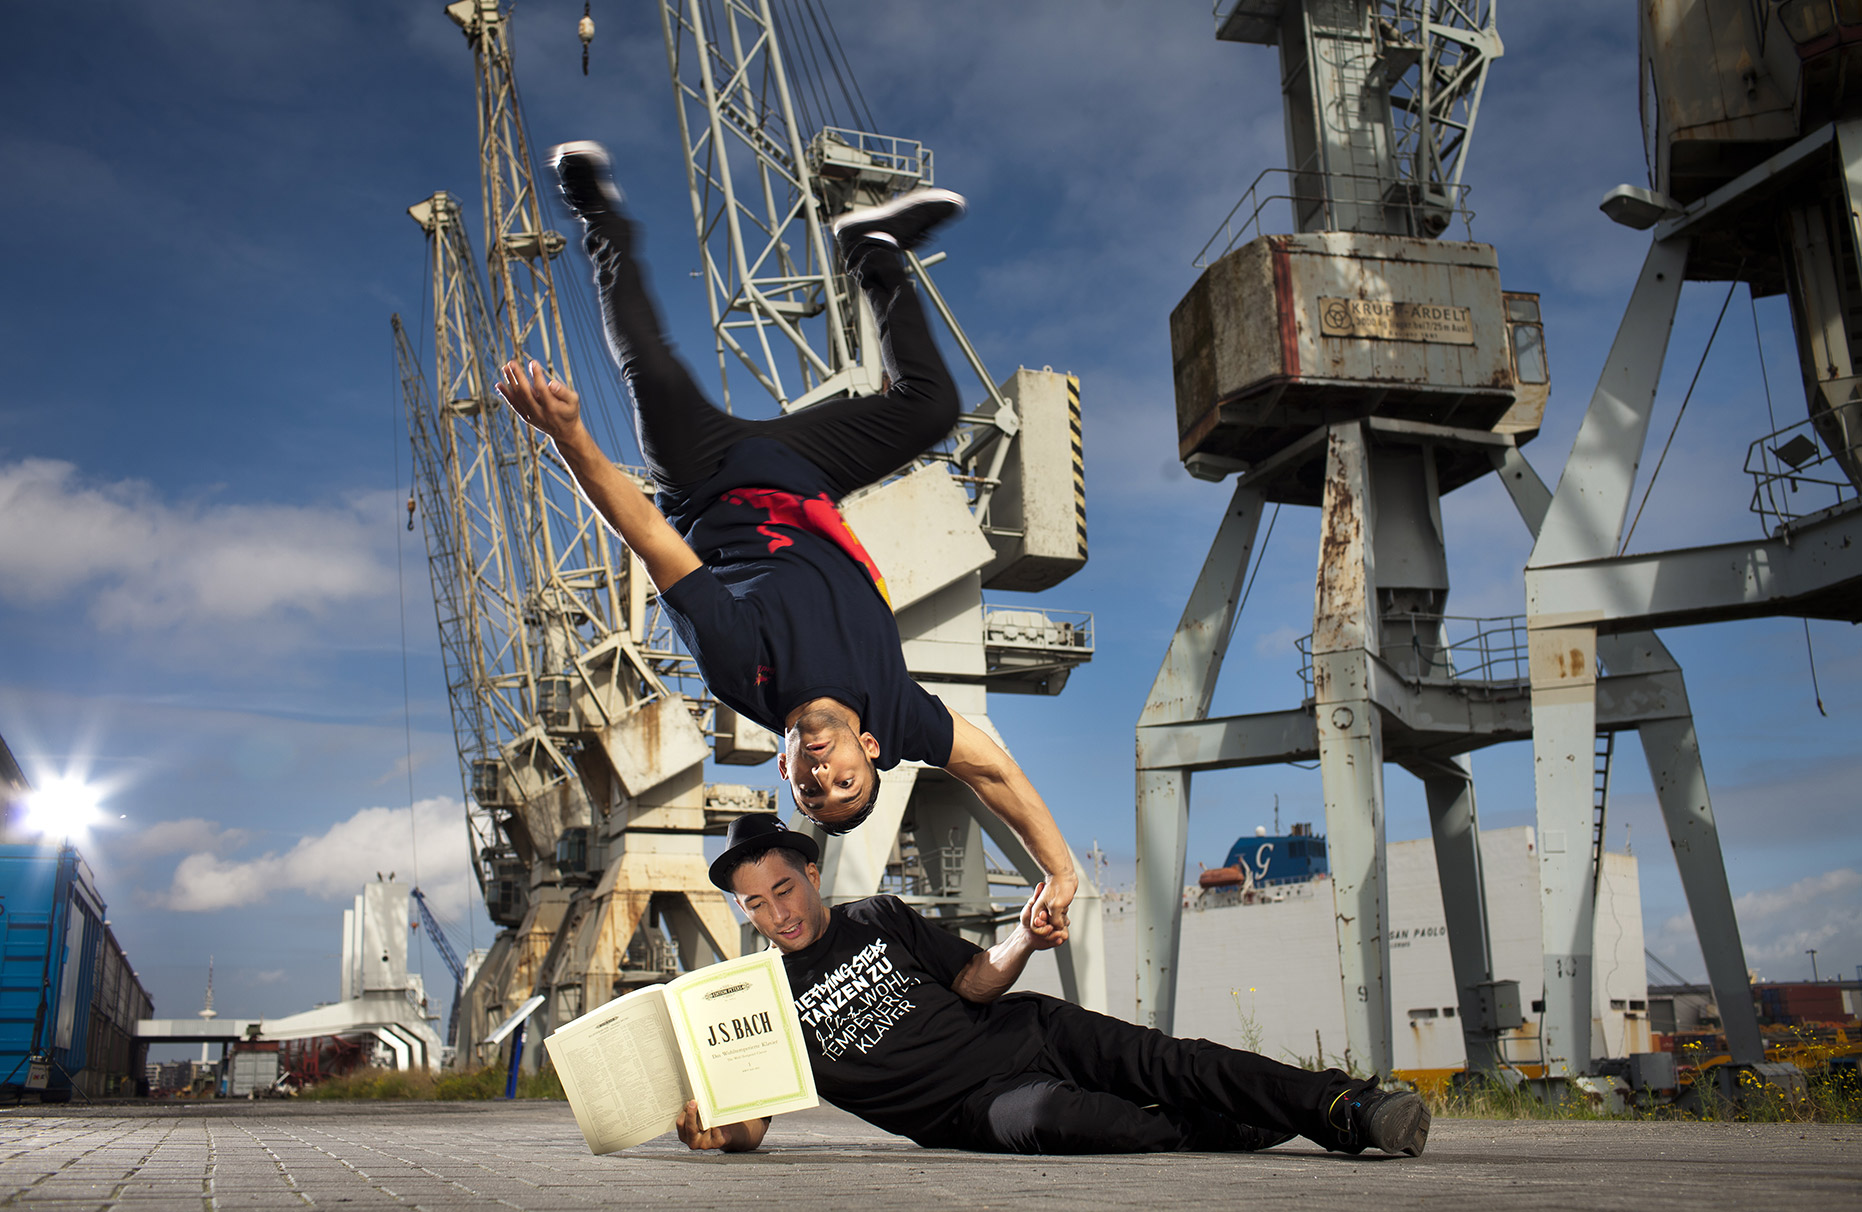 © Dirk Mathesius, Benny & Gengis from Flying Steps, Flying Bach Crew, client Red Bull, Hamburg